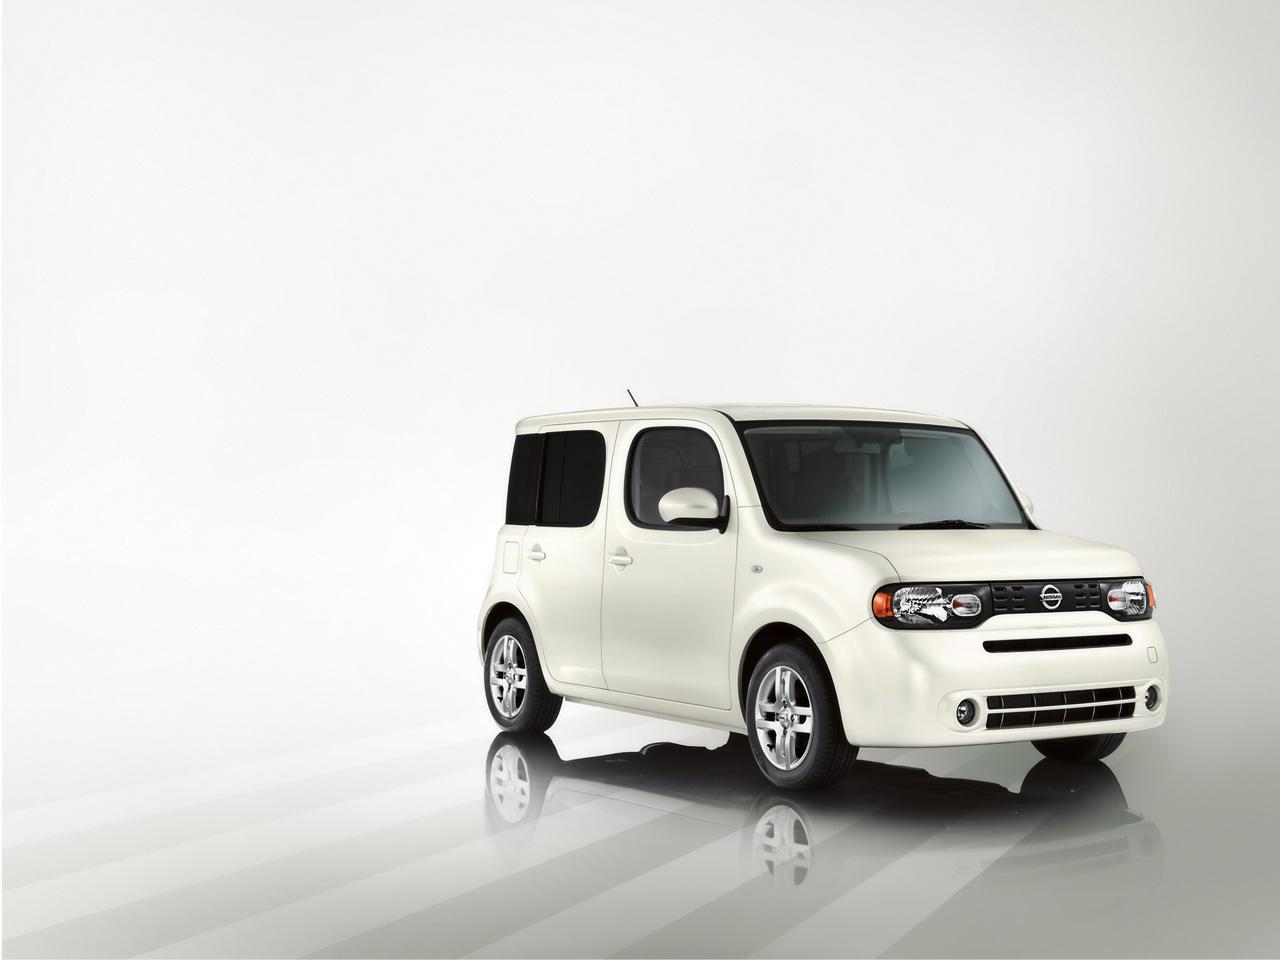 Nissan Cube Front And Side